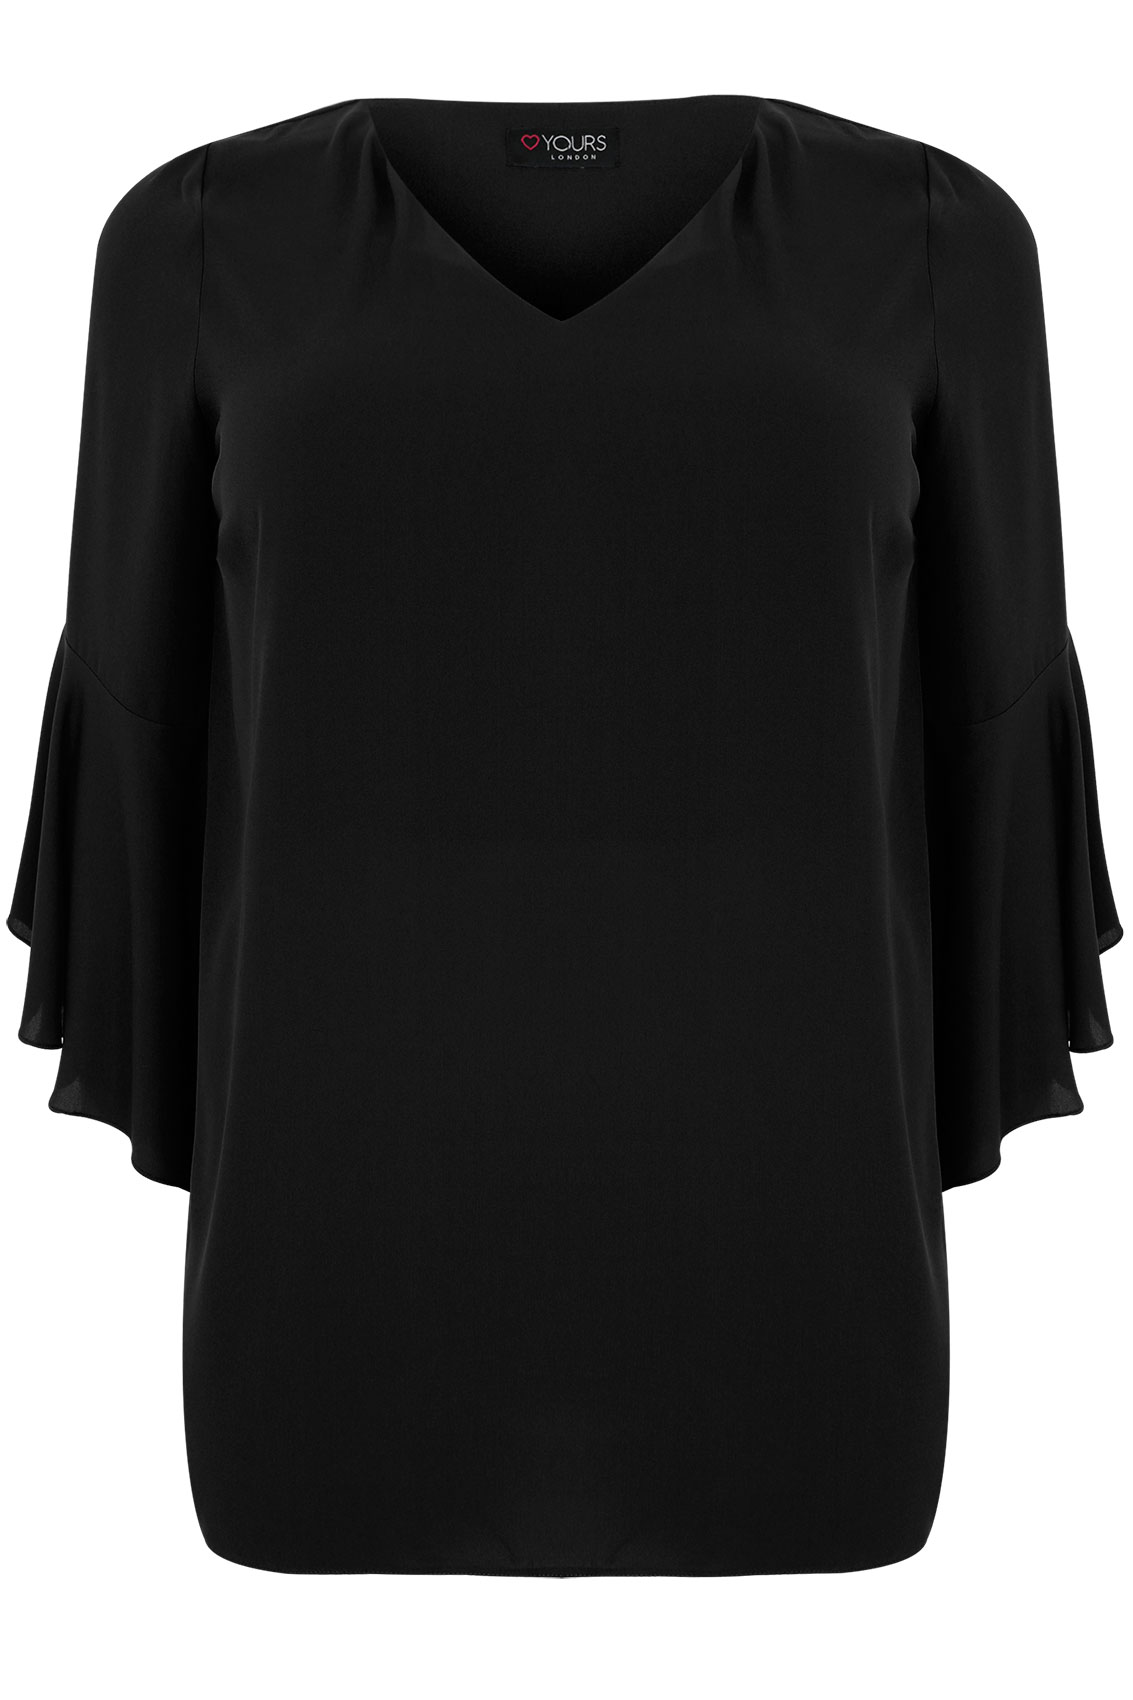 Black Blouse With Bell Sleeves Plus Size 16 to 32